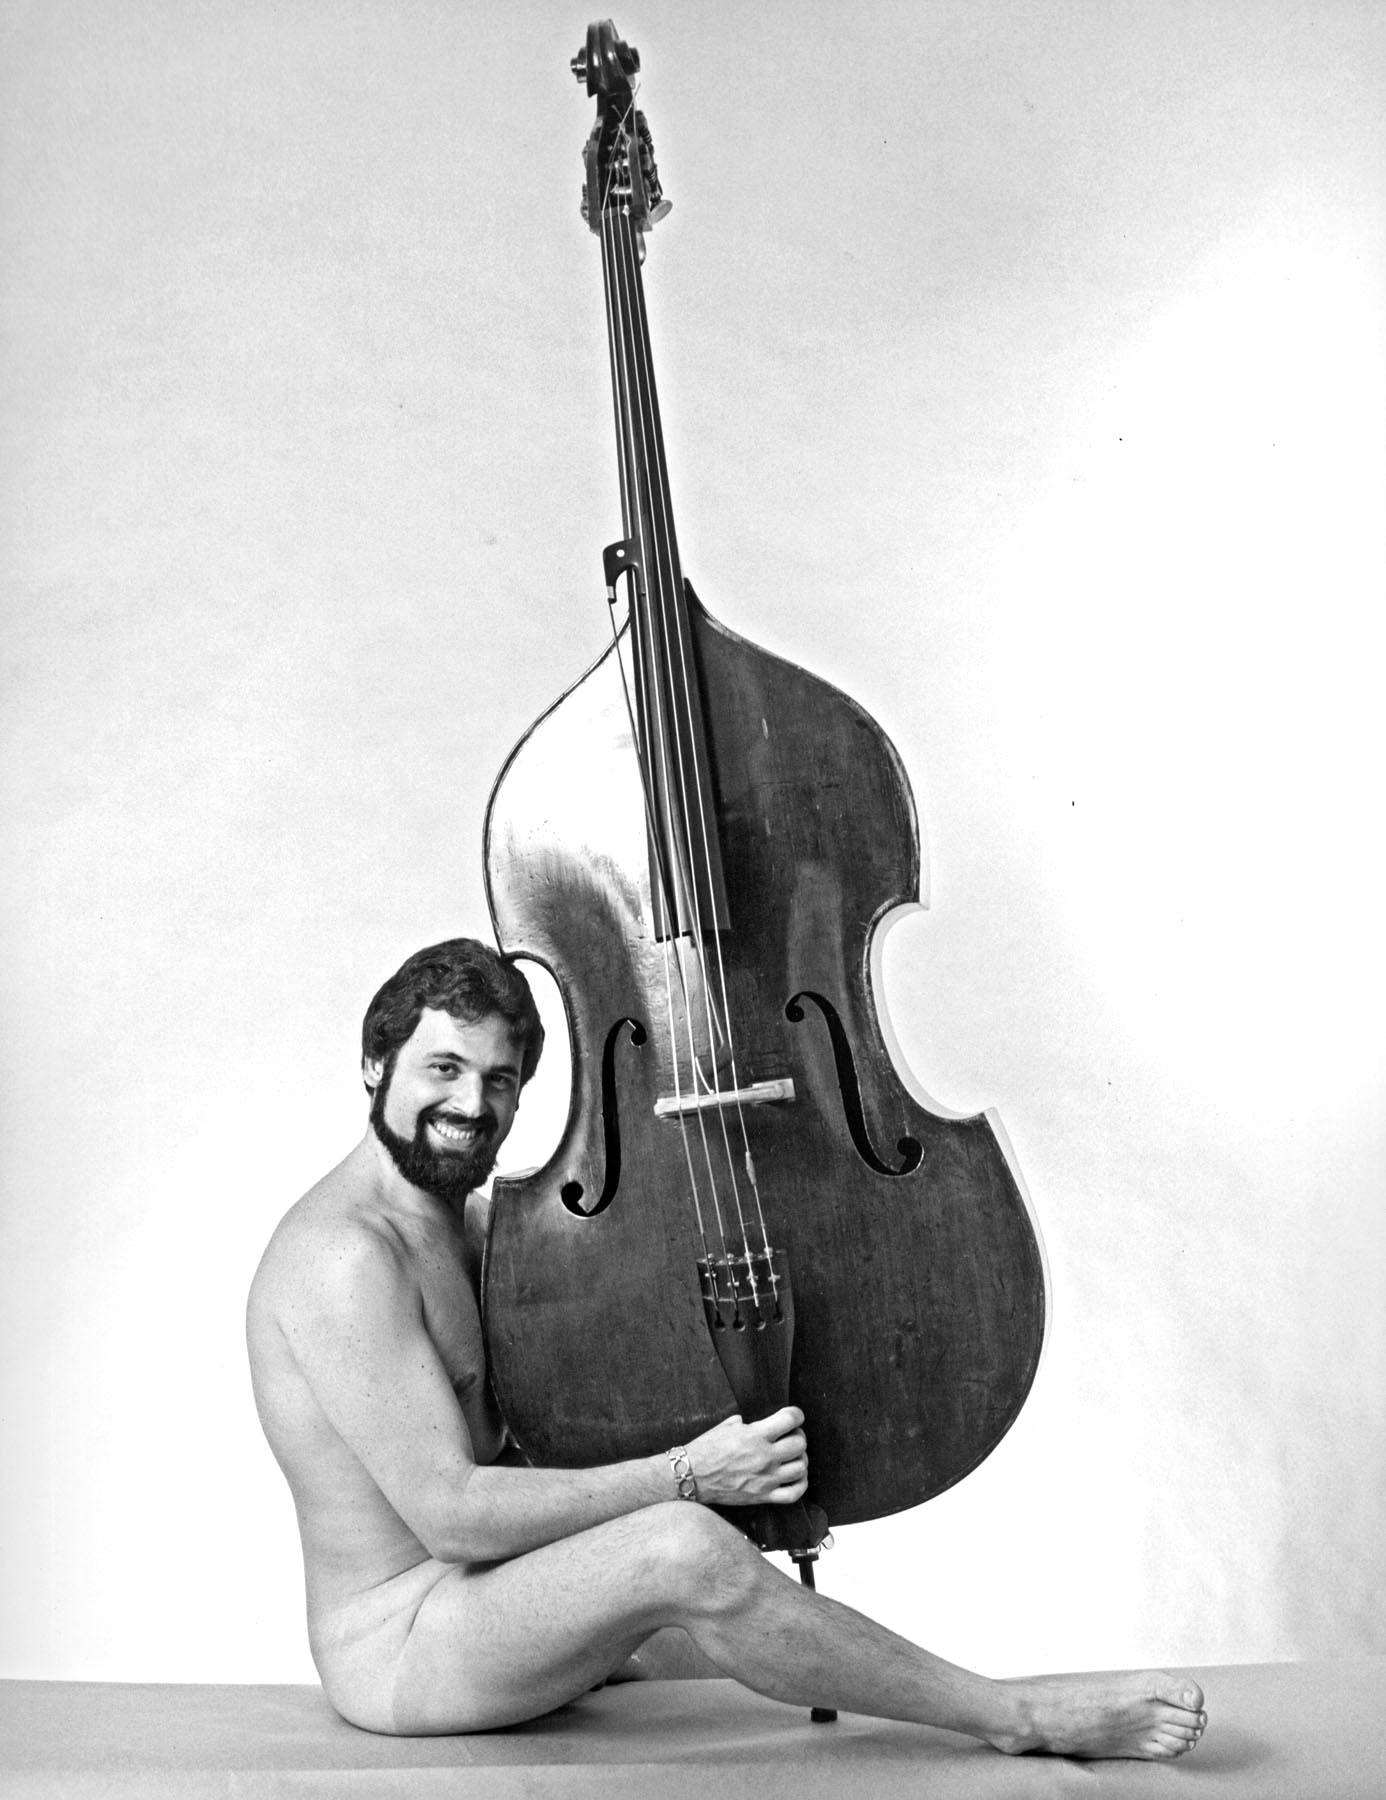 American classical bass virtuoso Gary Karr, photographed nude for After Dark